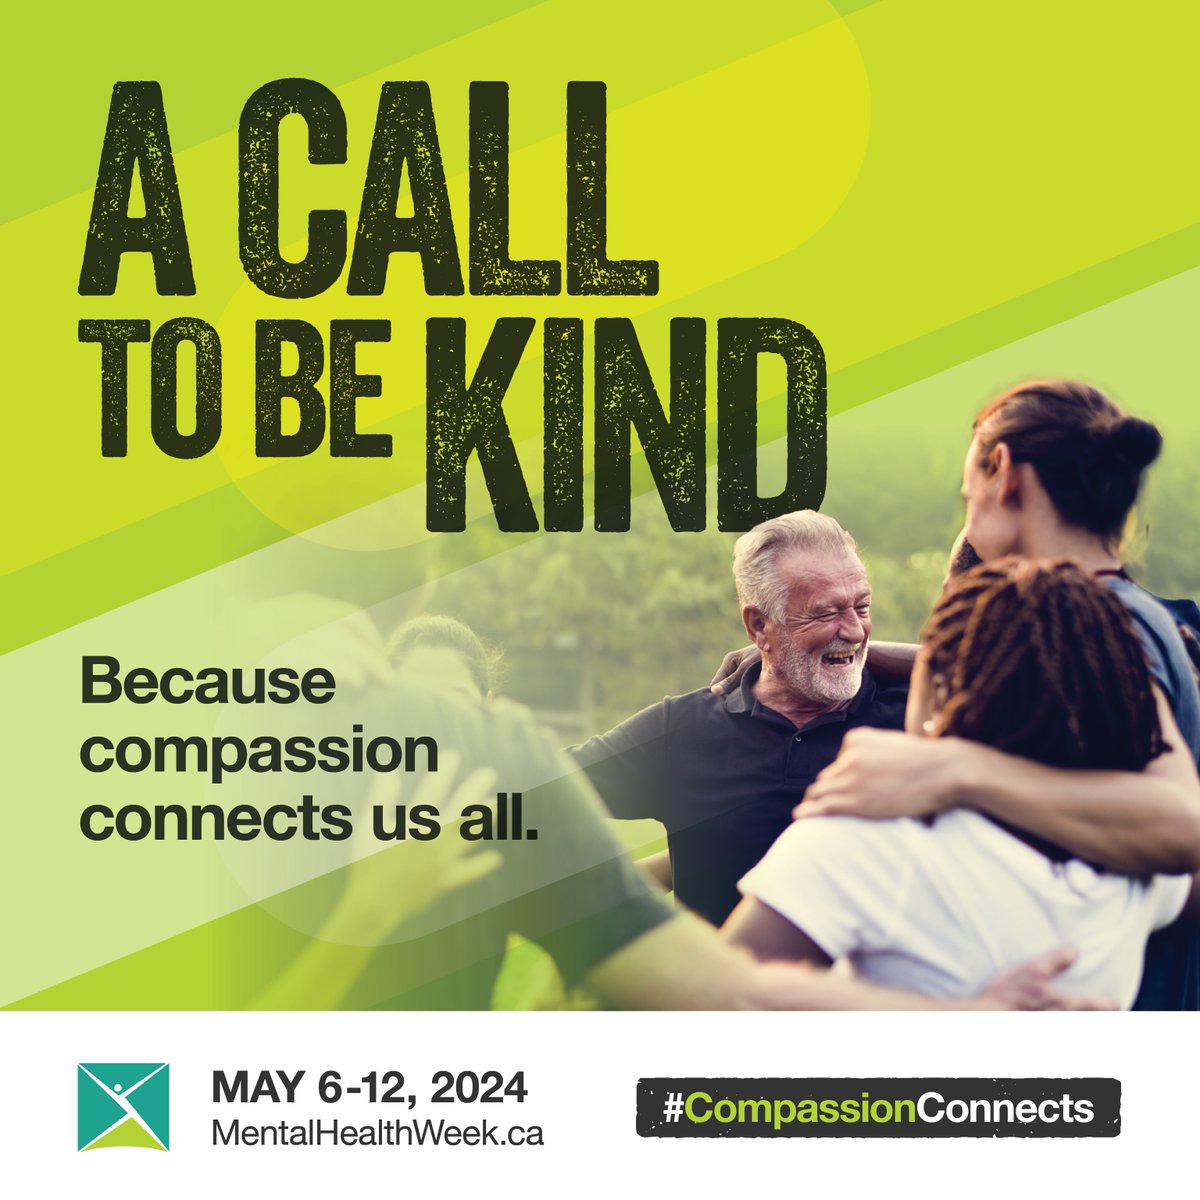 This #MentalHealthWeek, we're proud to join @CMHA_NTL and @CMHAOntario in a call to be kind. #CompassionConnects, and #SocialWorkers and other #MentalHealth professionals are critical to supporting #MentalHealth through compassion, connection and care. mentalhealthweek.ca